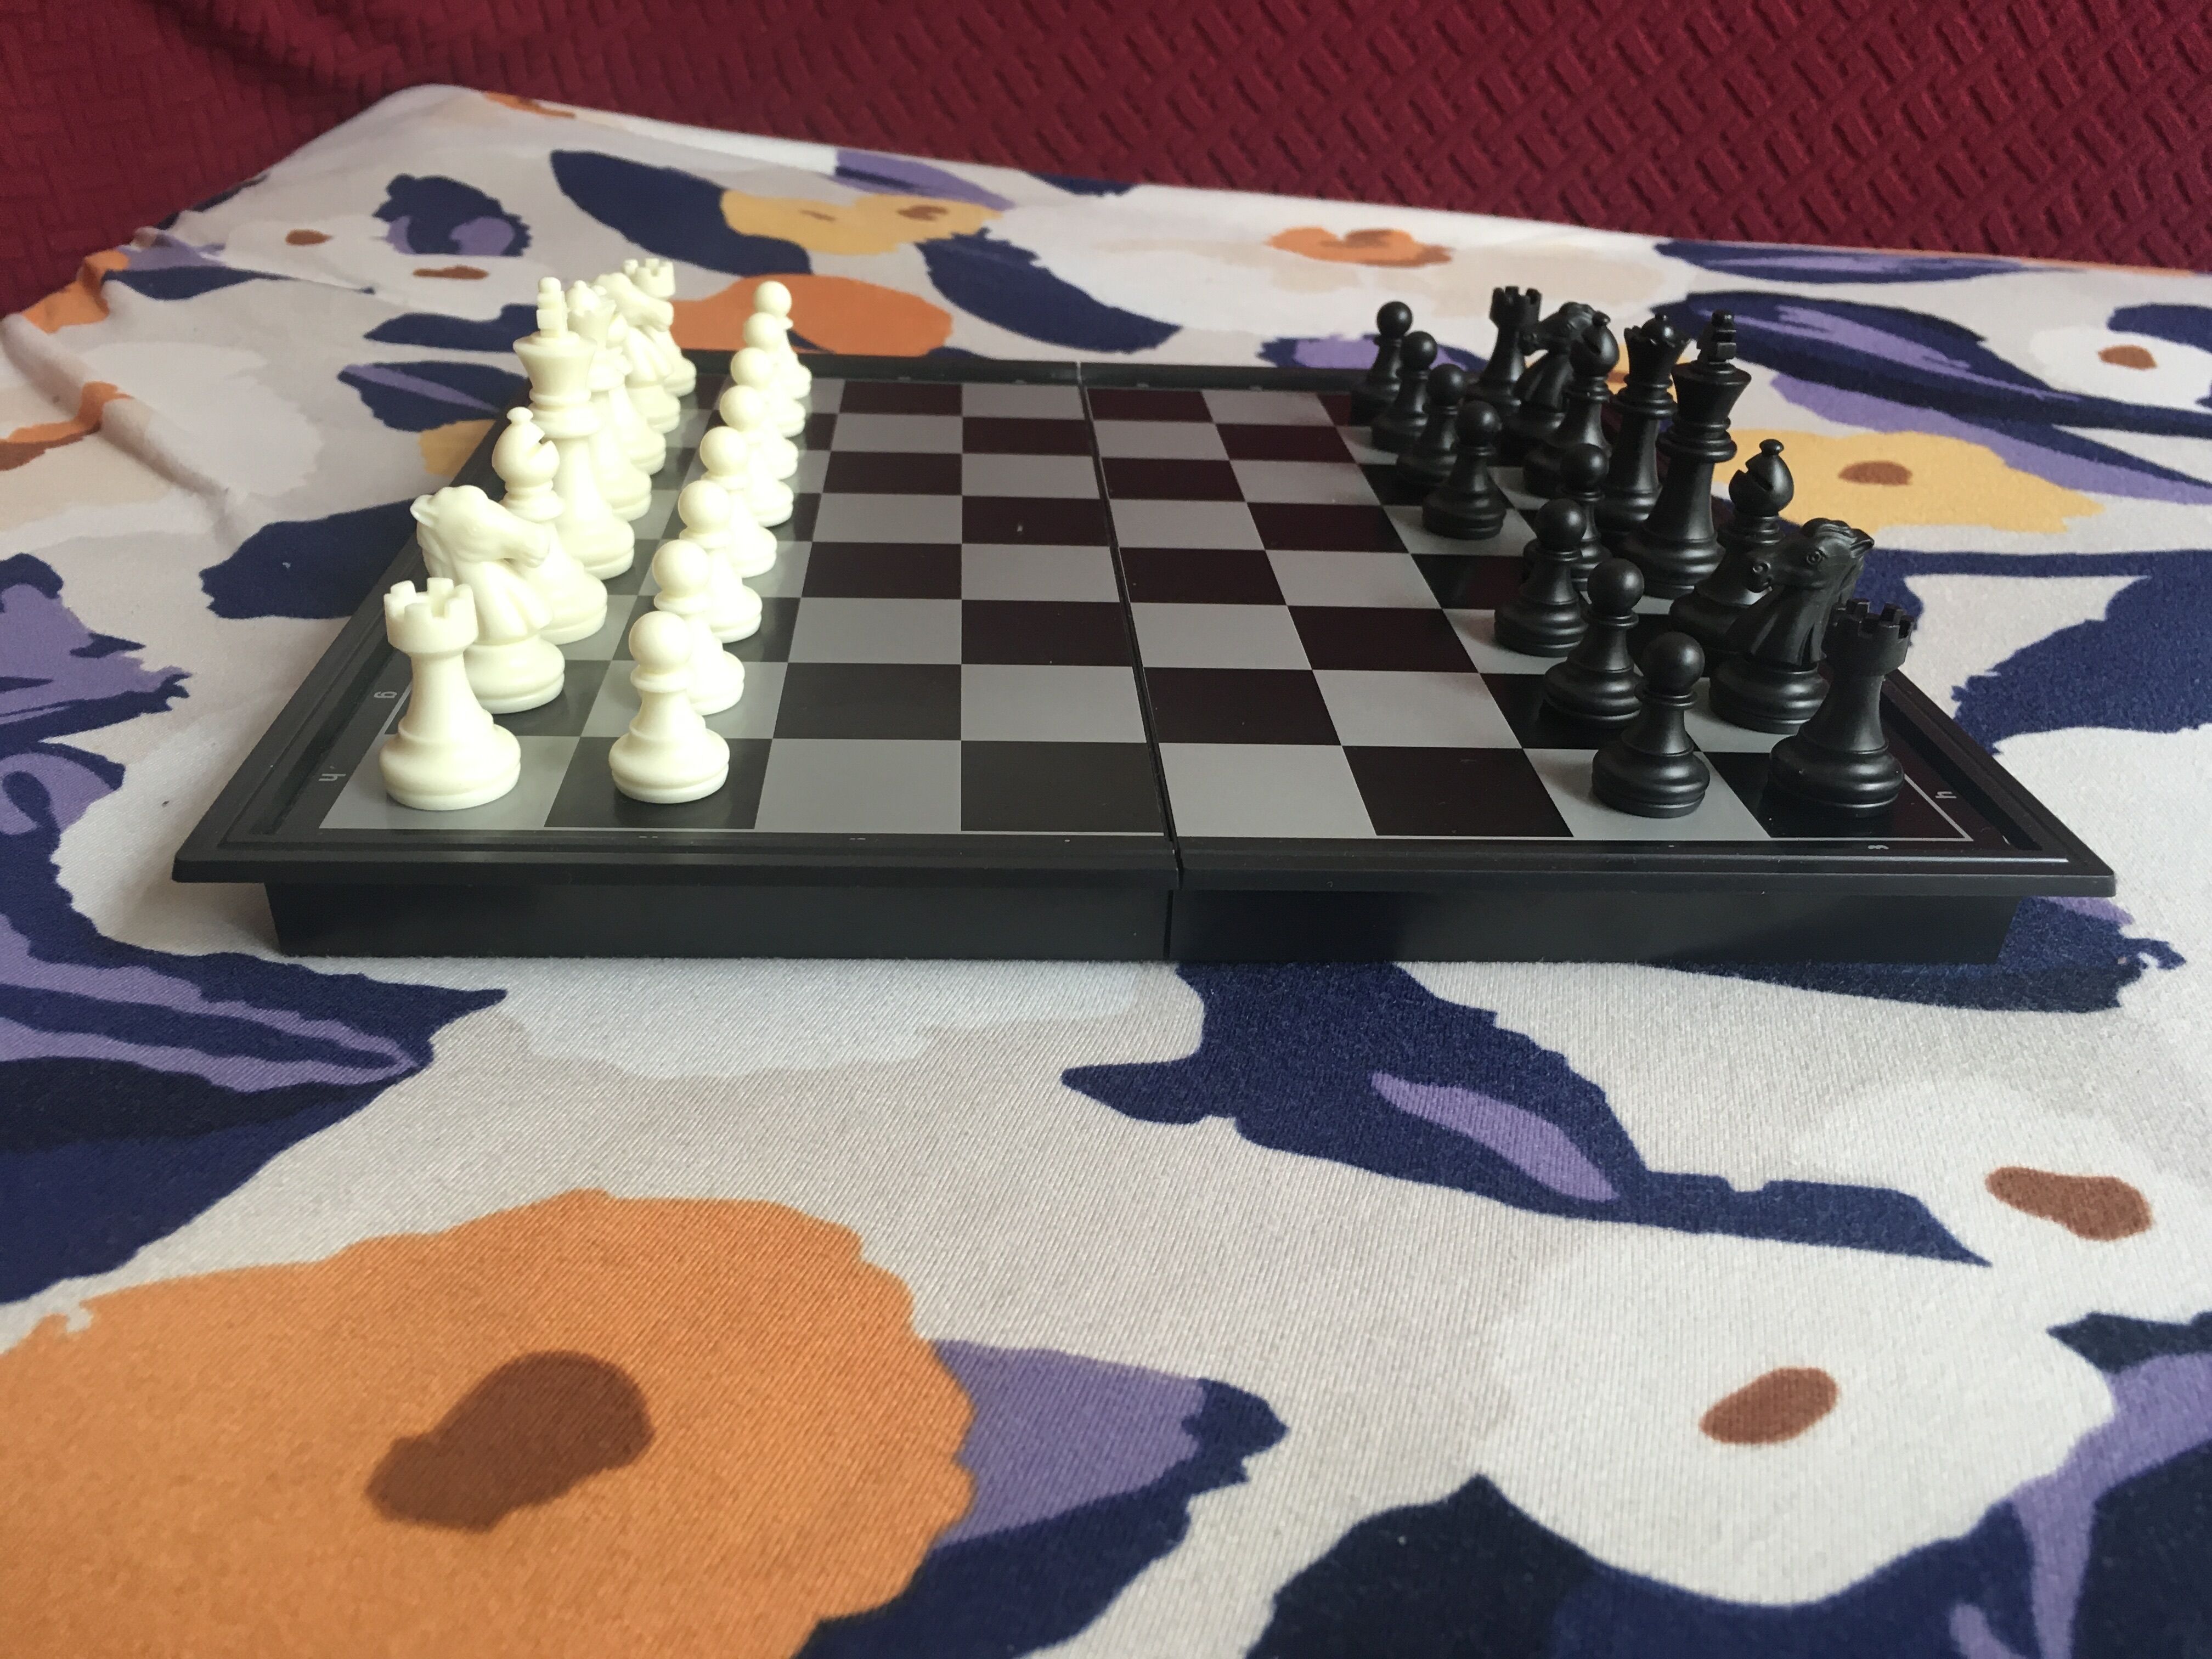 I Found An Even BETTER WAY To Play Chess in FPS Chess 